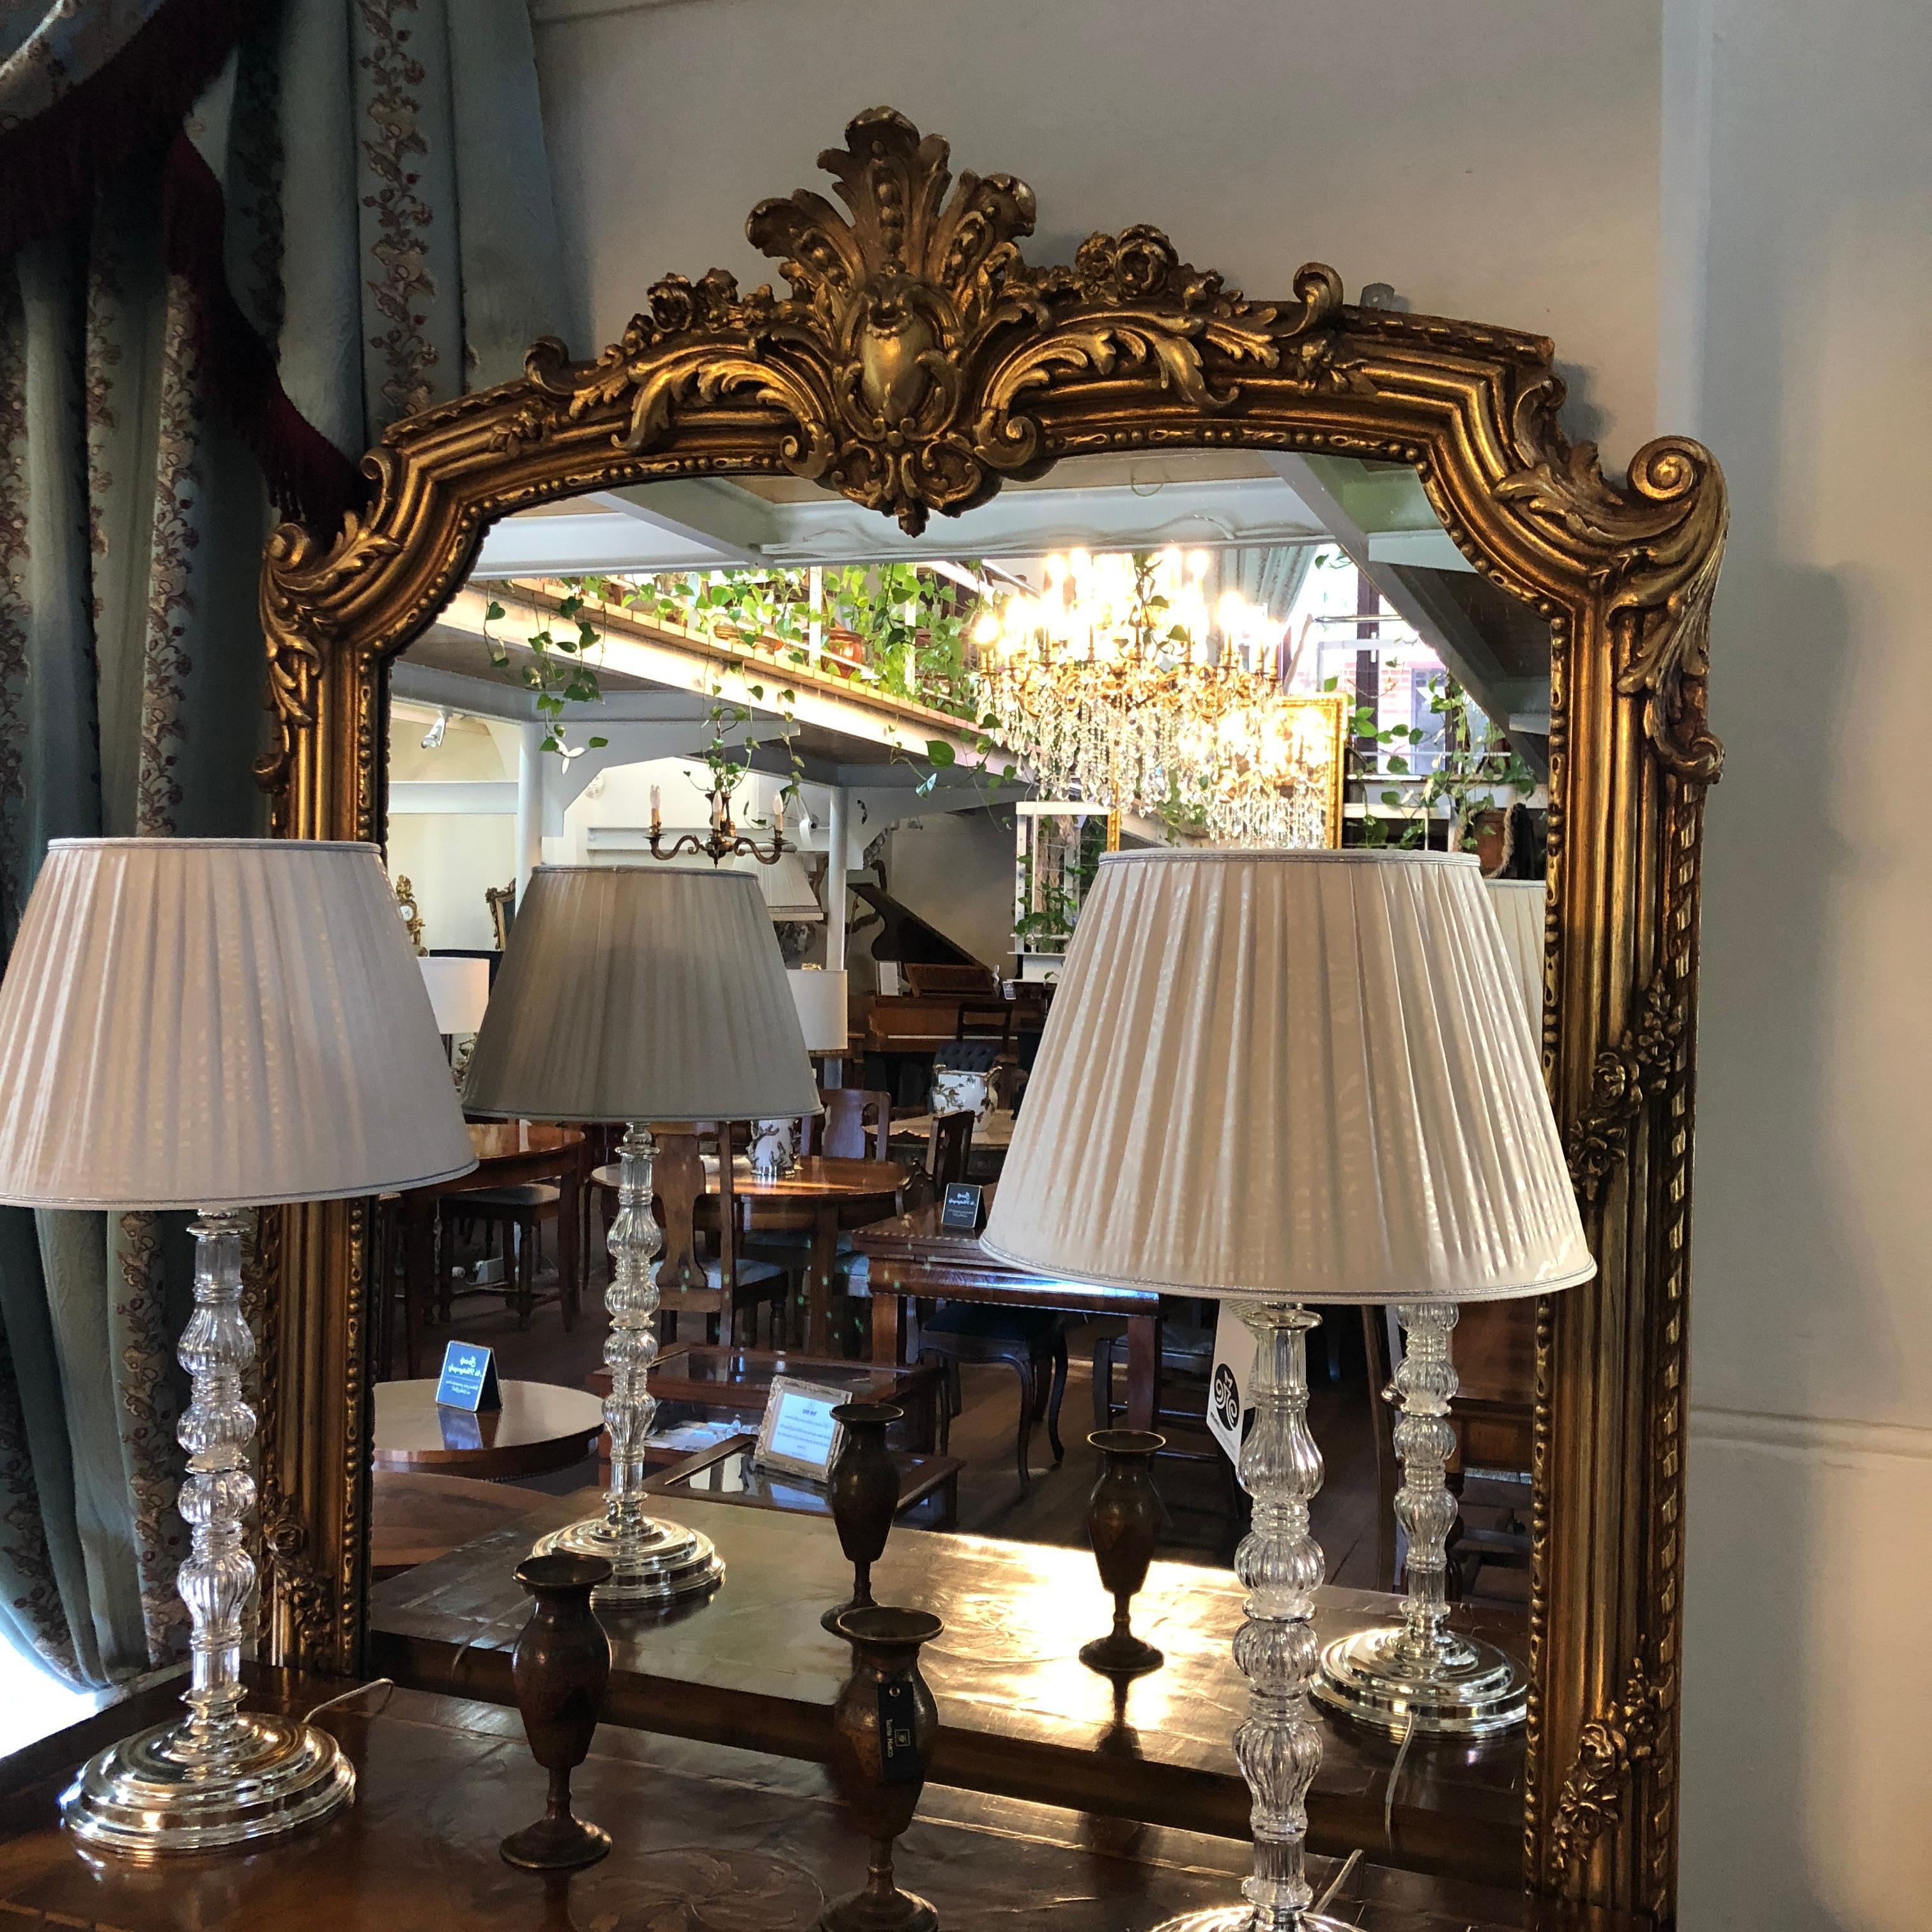 A grandiose mirror like this piece is extremely difficult to find and we are delighted to offer it for sale in our gallery. This magnificent 20th century, French Louis XV gilded wall mirror features the depiction of the Fleur De Lis at the top